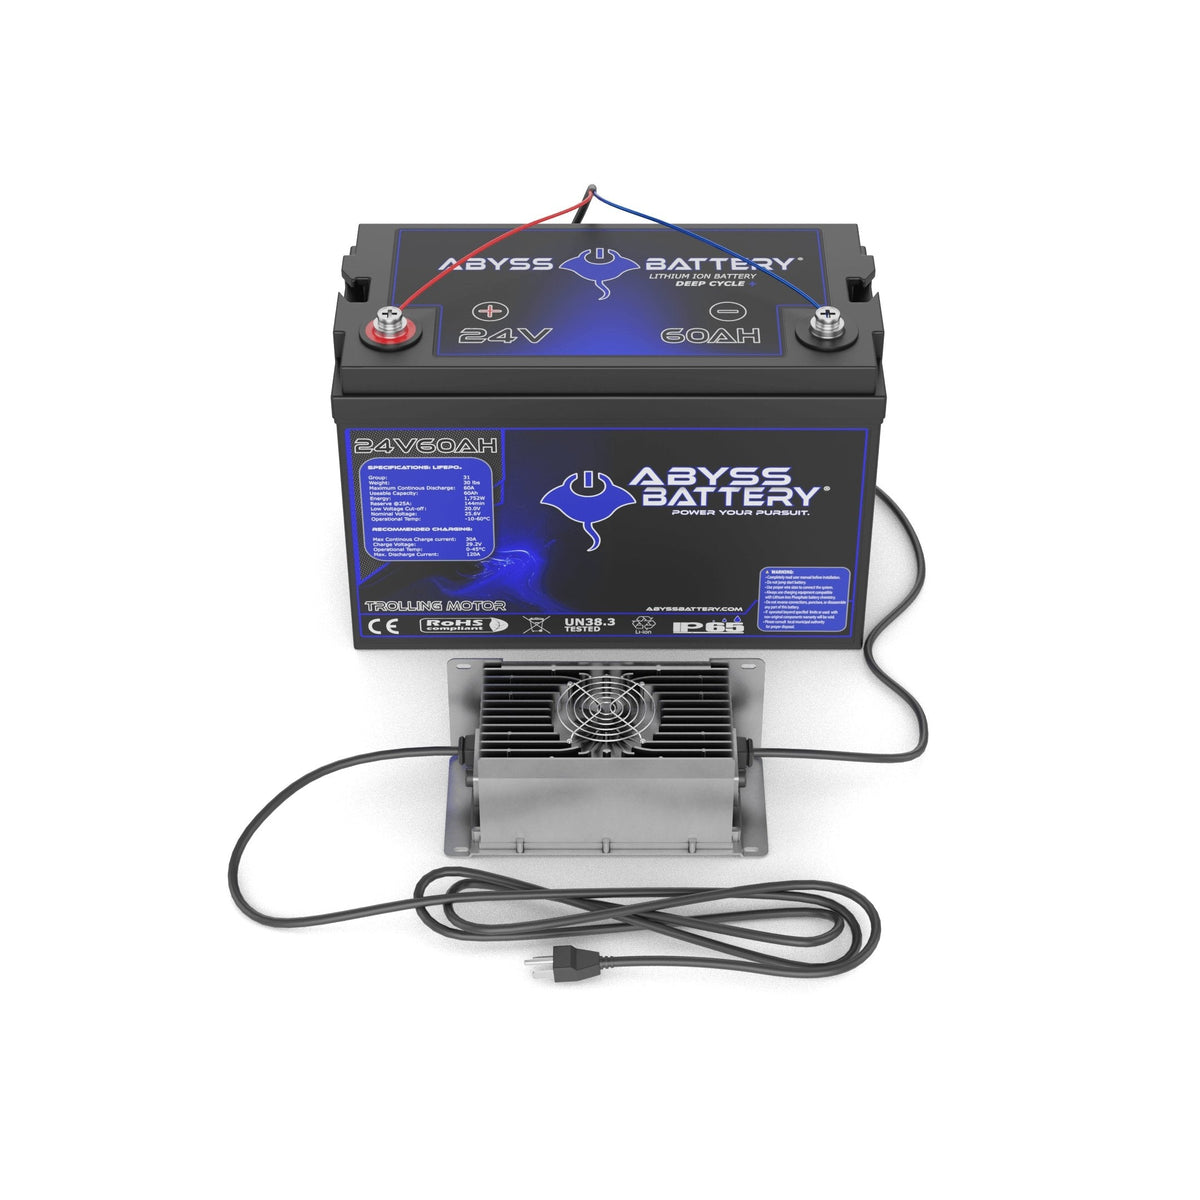 Abyss Battery 24V 60Ah Lithium Trolling Motor Battery Kit, Bluetooth / Group 27